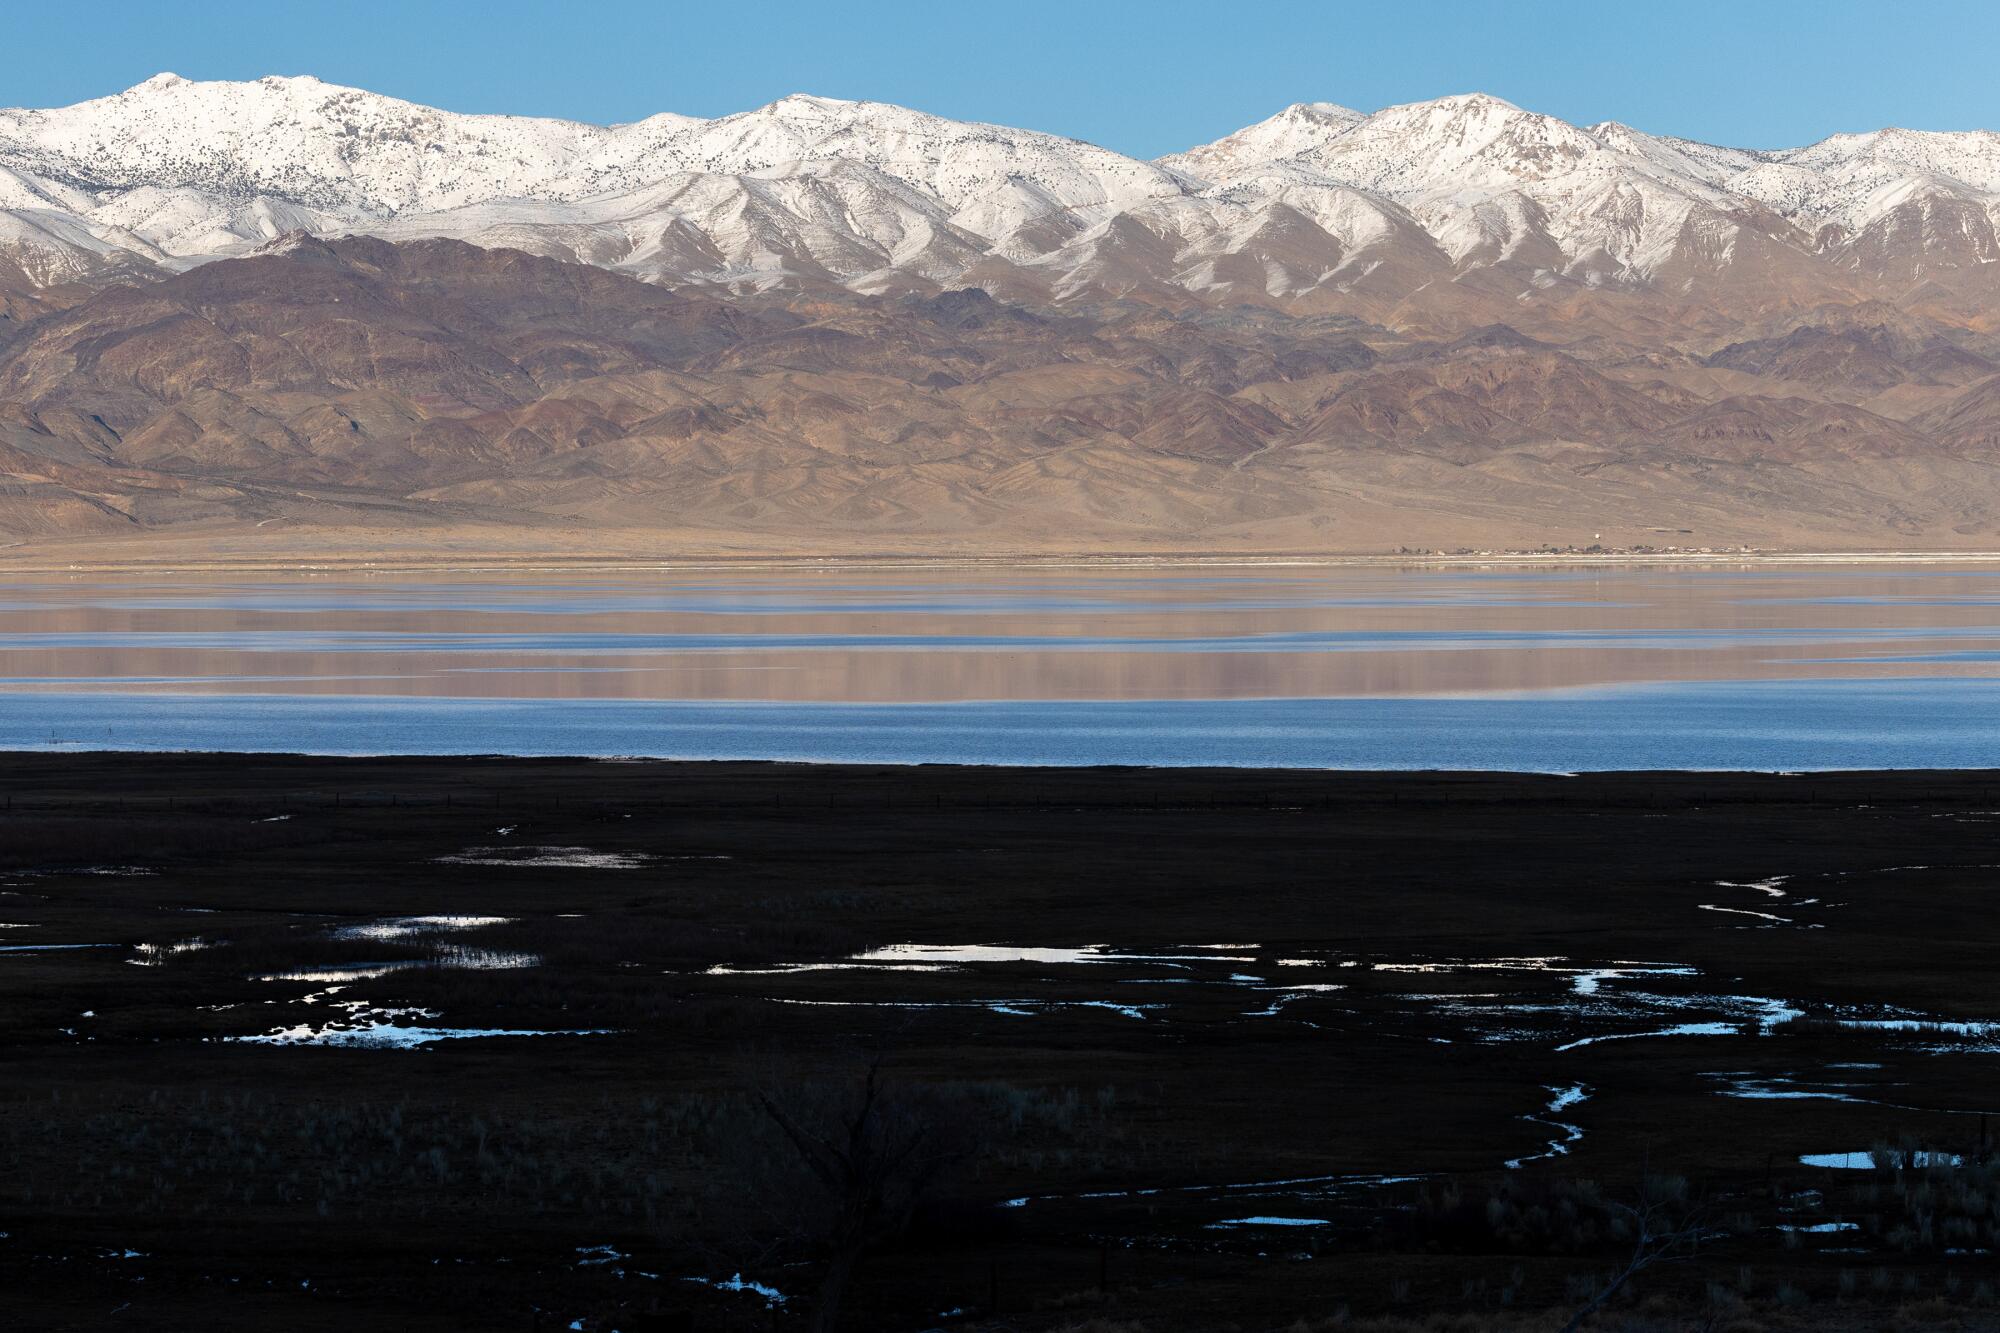 The snow-capped Inyo Mountains reflected in Owens Lake.